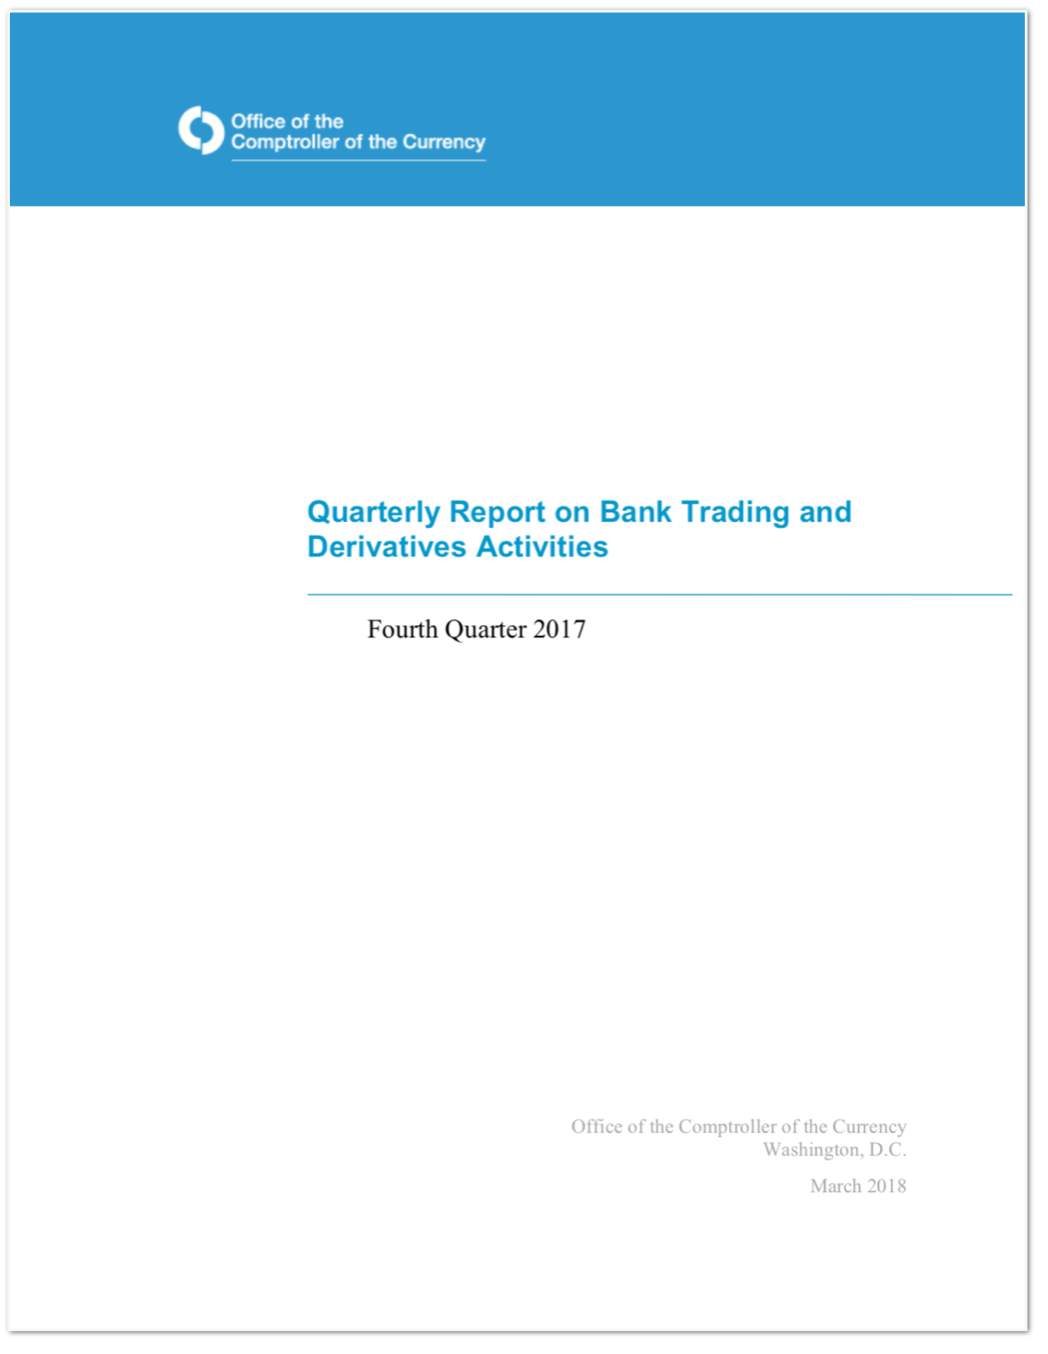 Quarterly Report on Bank Trading and Derivatives Activities